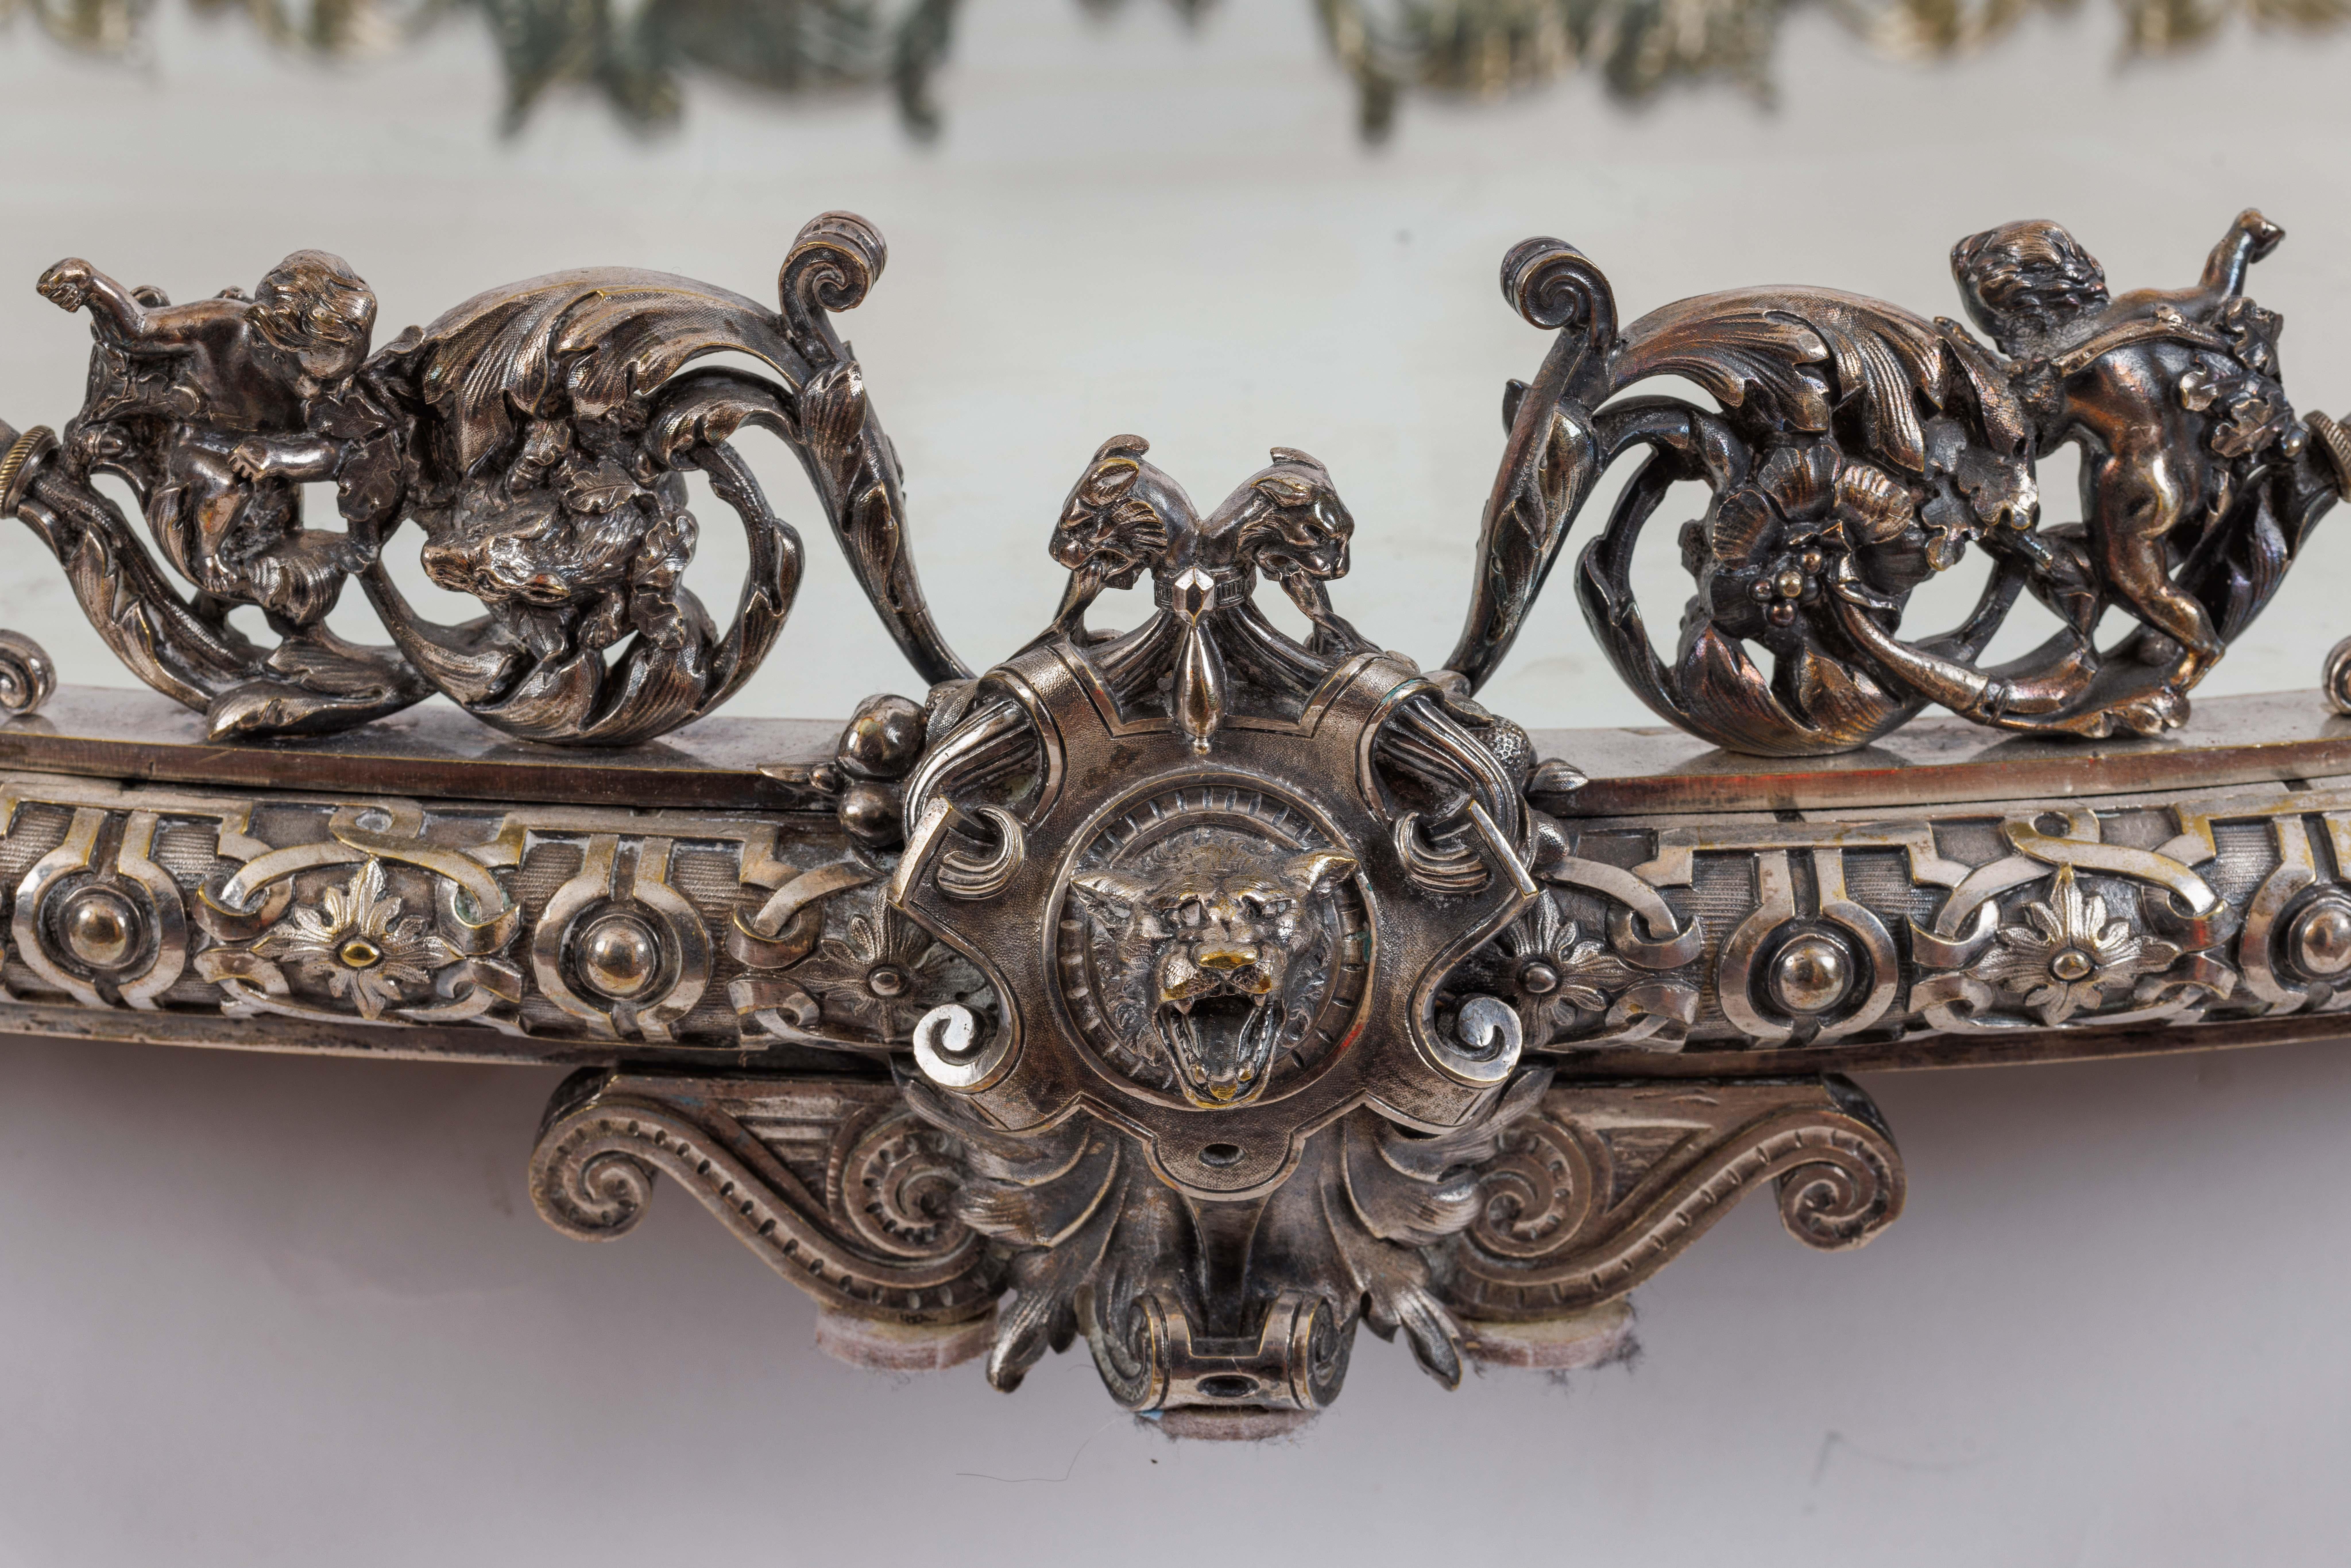 A Massive Napoleon III French Silvered Bronze Mirrored Surtout De Table Plateau, circa 1870

Immerse yourself in the intricate world of cherubs, as delicate and enchanting figures dance around the perimeter, adding an ethereal touch to the tableau.